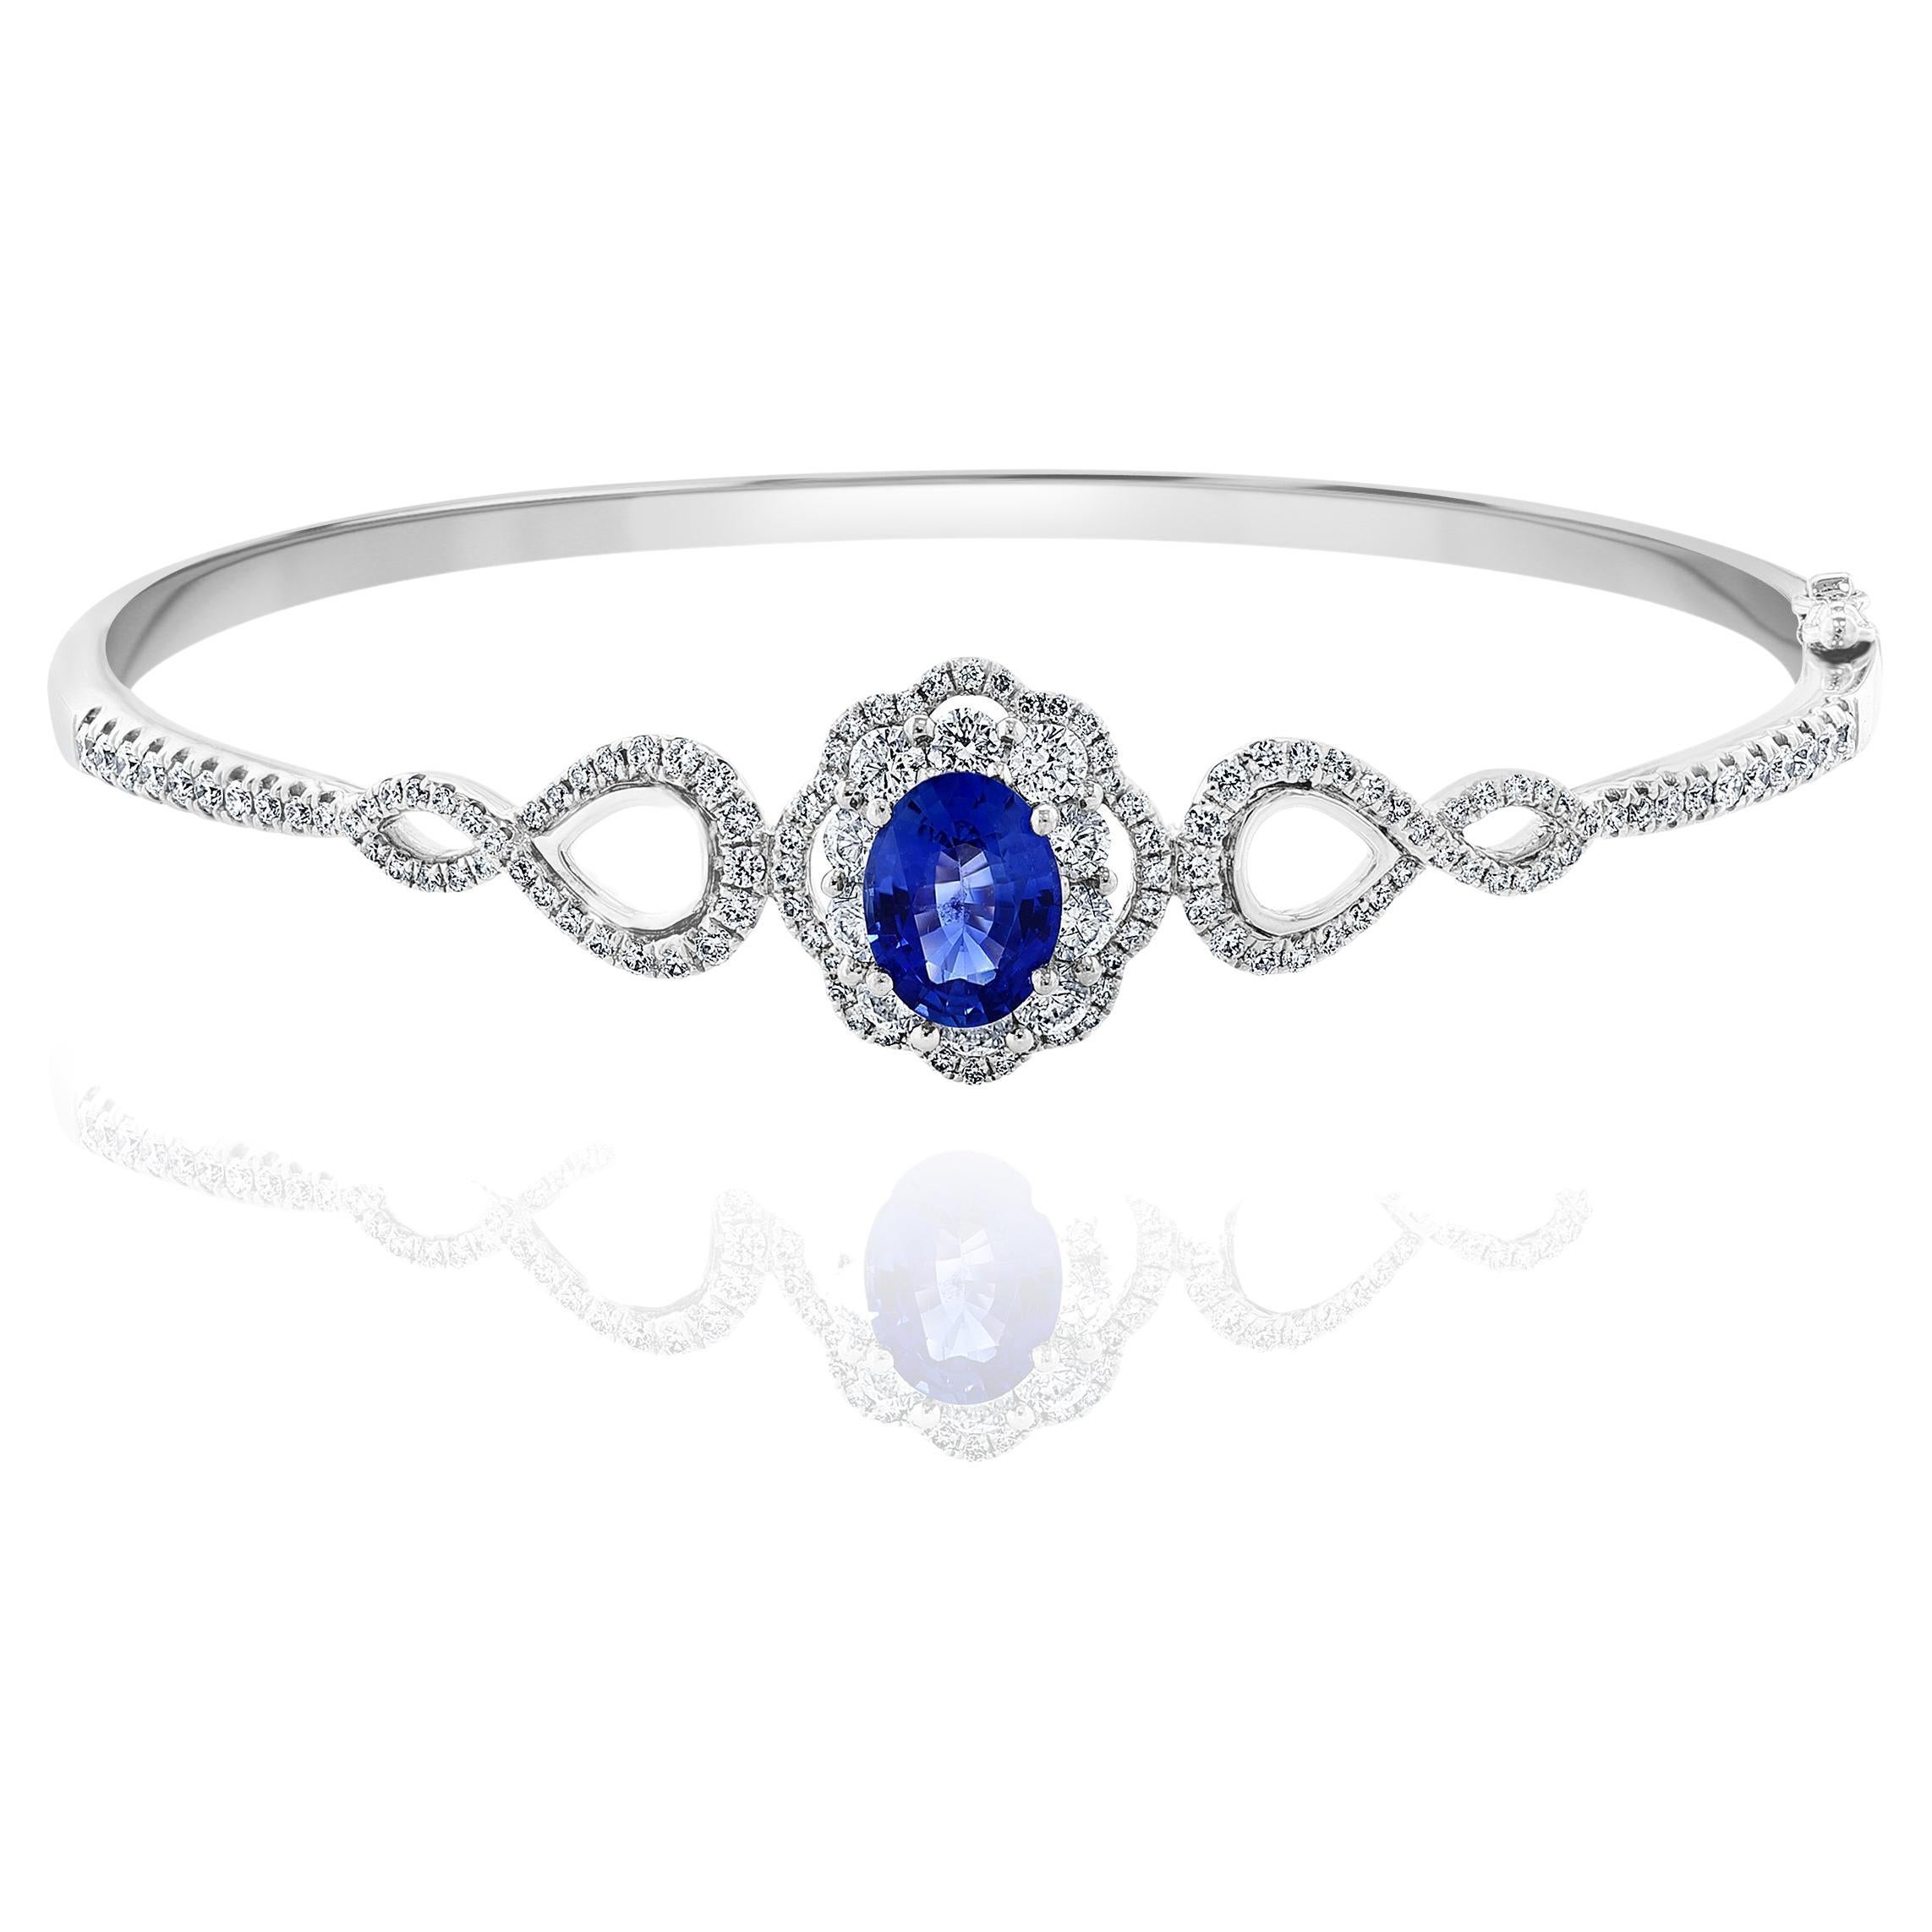 1.71 Carat Oval cut  Sapphire and Diamond Bangle Bracelet in 18K White Gold For Sale